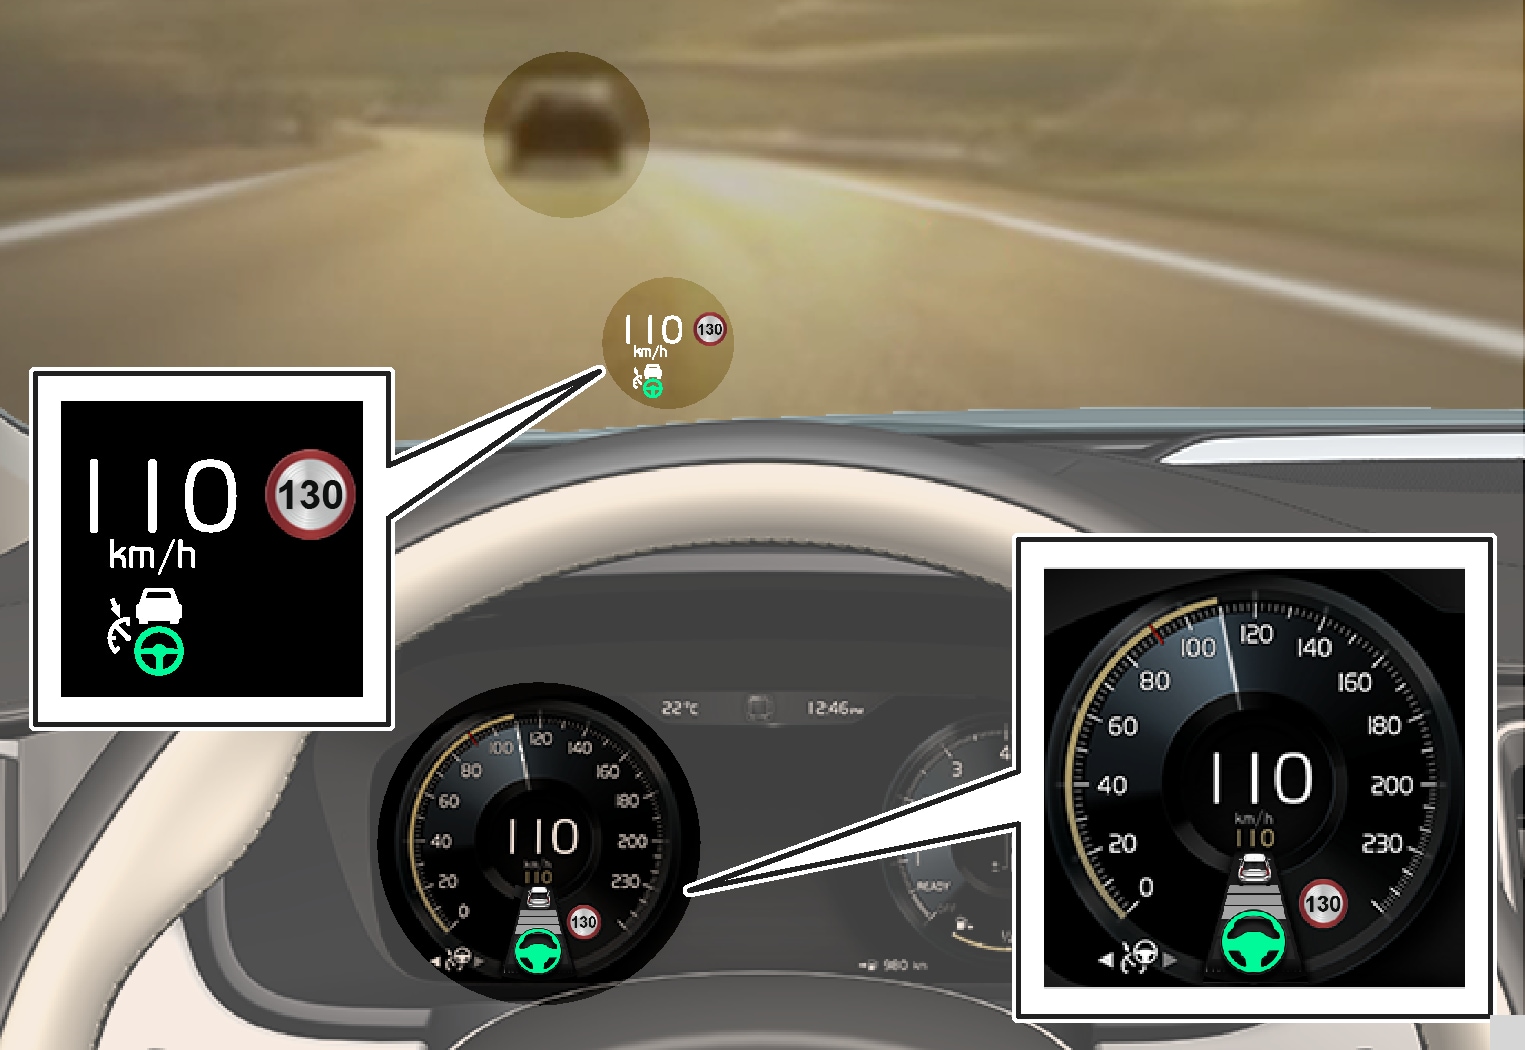 P5-V90/S90-1646-Pilot Assist, set to maintain 110 km/h, to follow a vehicle ahead and steering assistance